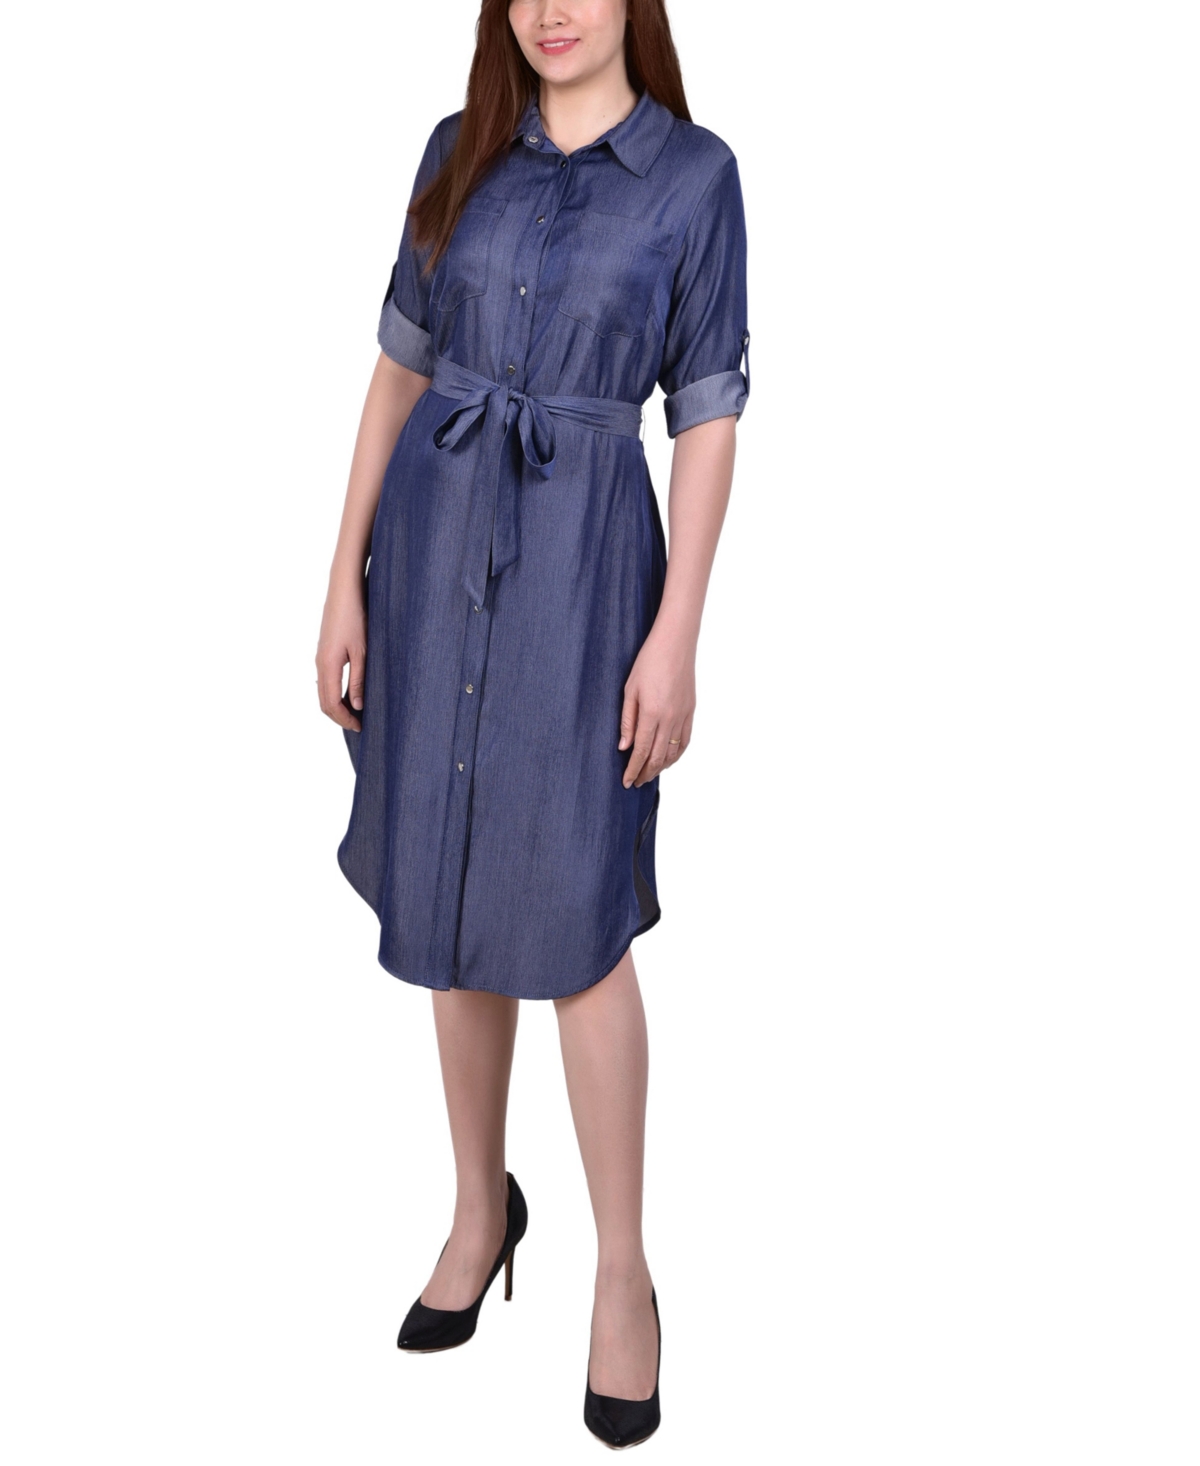 NY COLLECTION WOMEN'S 3/4 ROLL TAB SLEEVE DENIM BELTED SHIRT DRESS